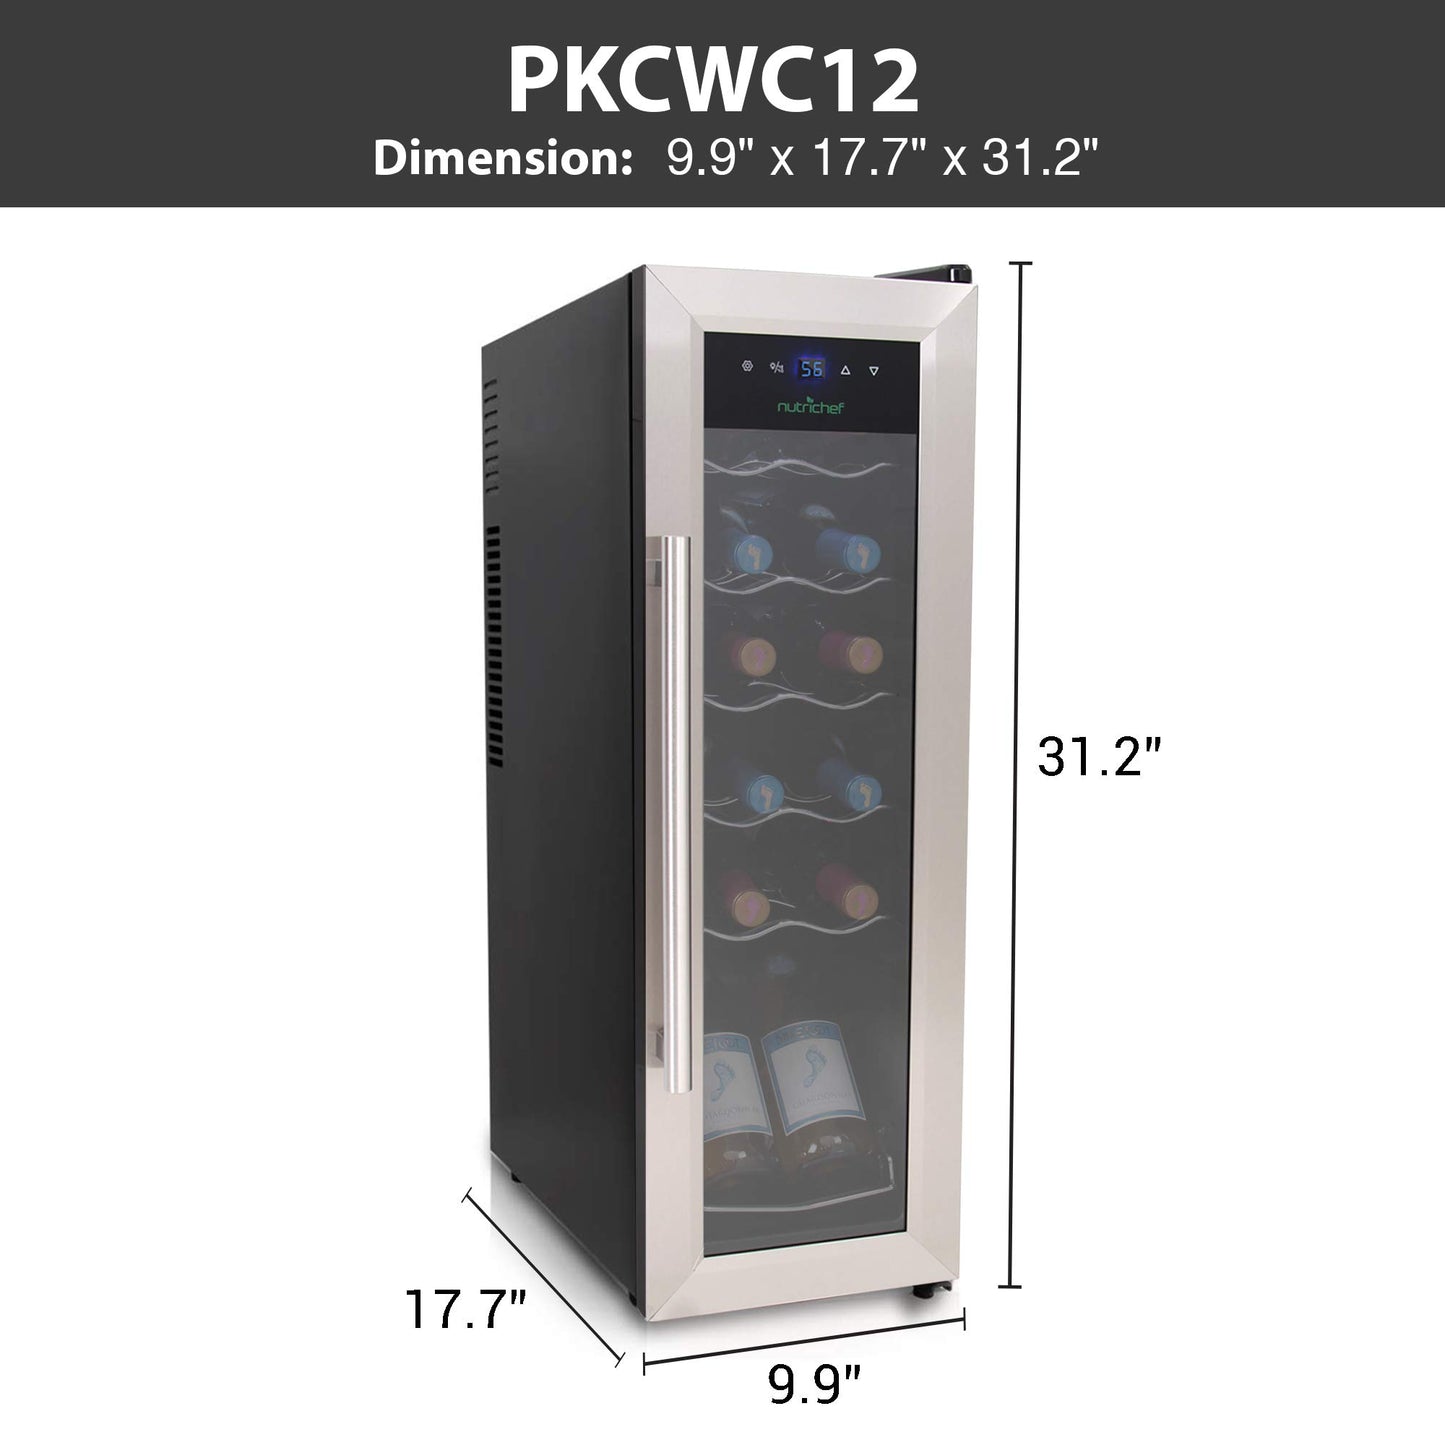 NutriChef PKCWC12 Cooler Refrigerator White And Red Countertop Chiller, Freestanding Compact Mini Wine Fridge with Digital Control, 12 Bottle-Stainless Steel